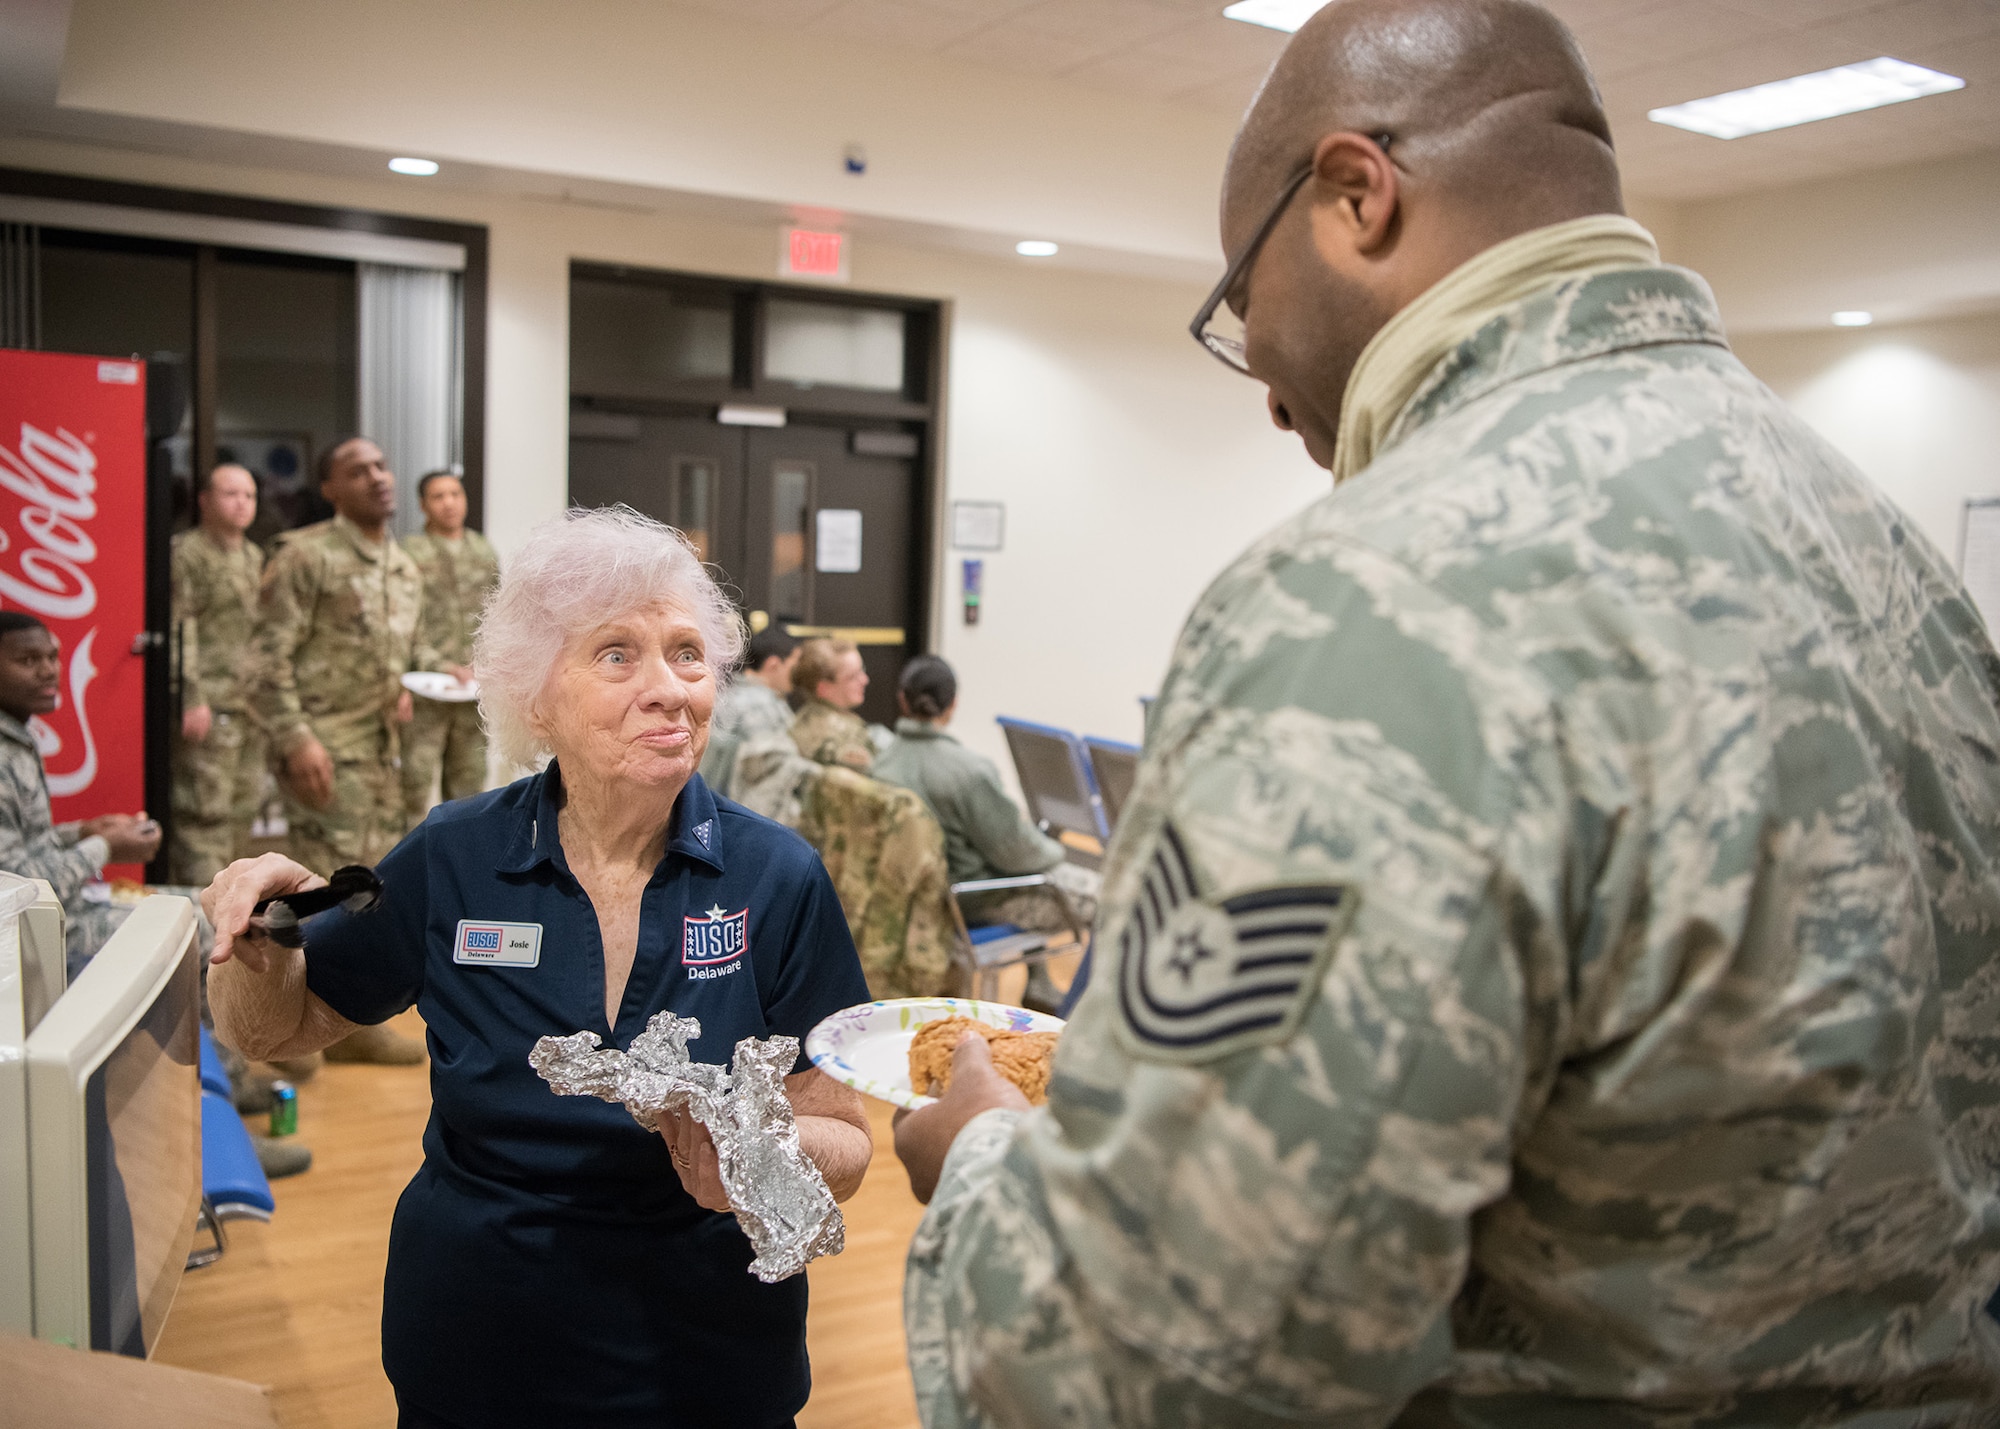 Josie Donithan, USO Delaware volunteer, serves fried chicken to honor guard team members and mortuary staff prior to a dignified transfer Jan. 24, 2019, at Dover Air Force Base, Delaware. USO Delaware served approximately 82,000 servicemembers and their families in 2018. (U.S. Air Force photo by Mauricio Campino)